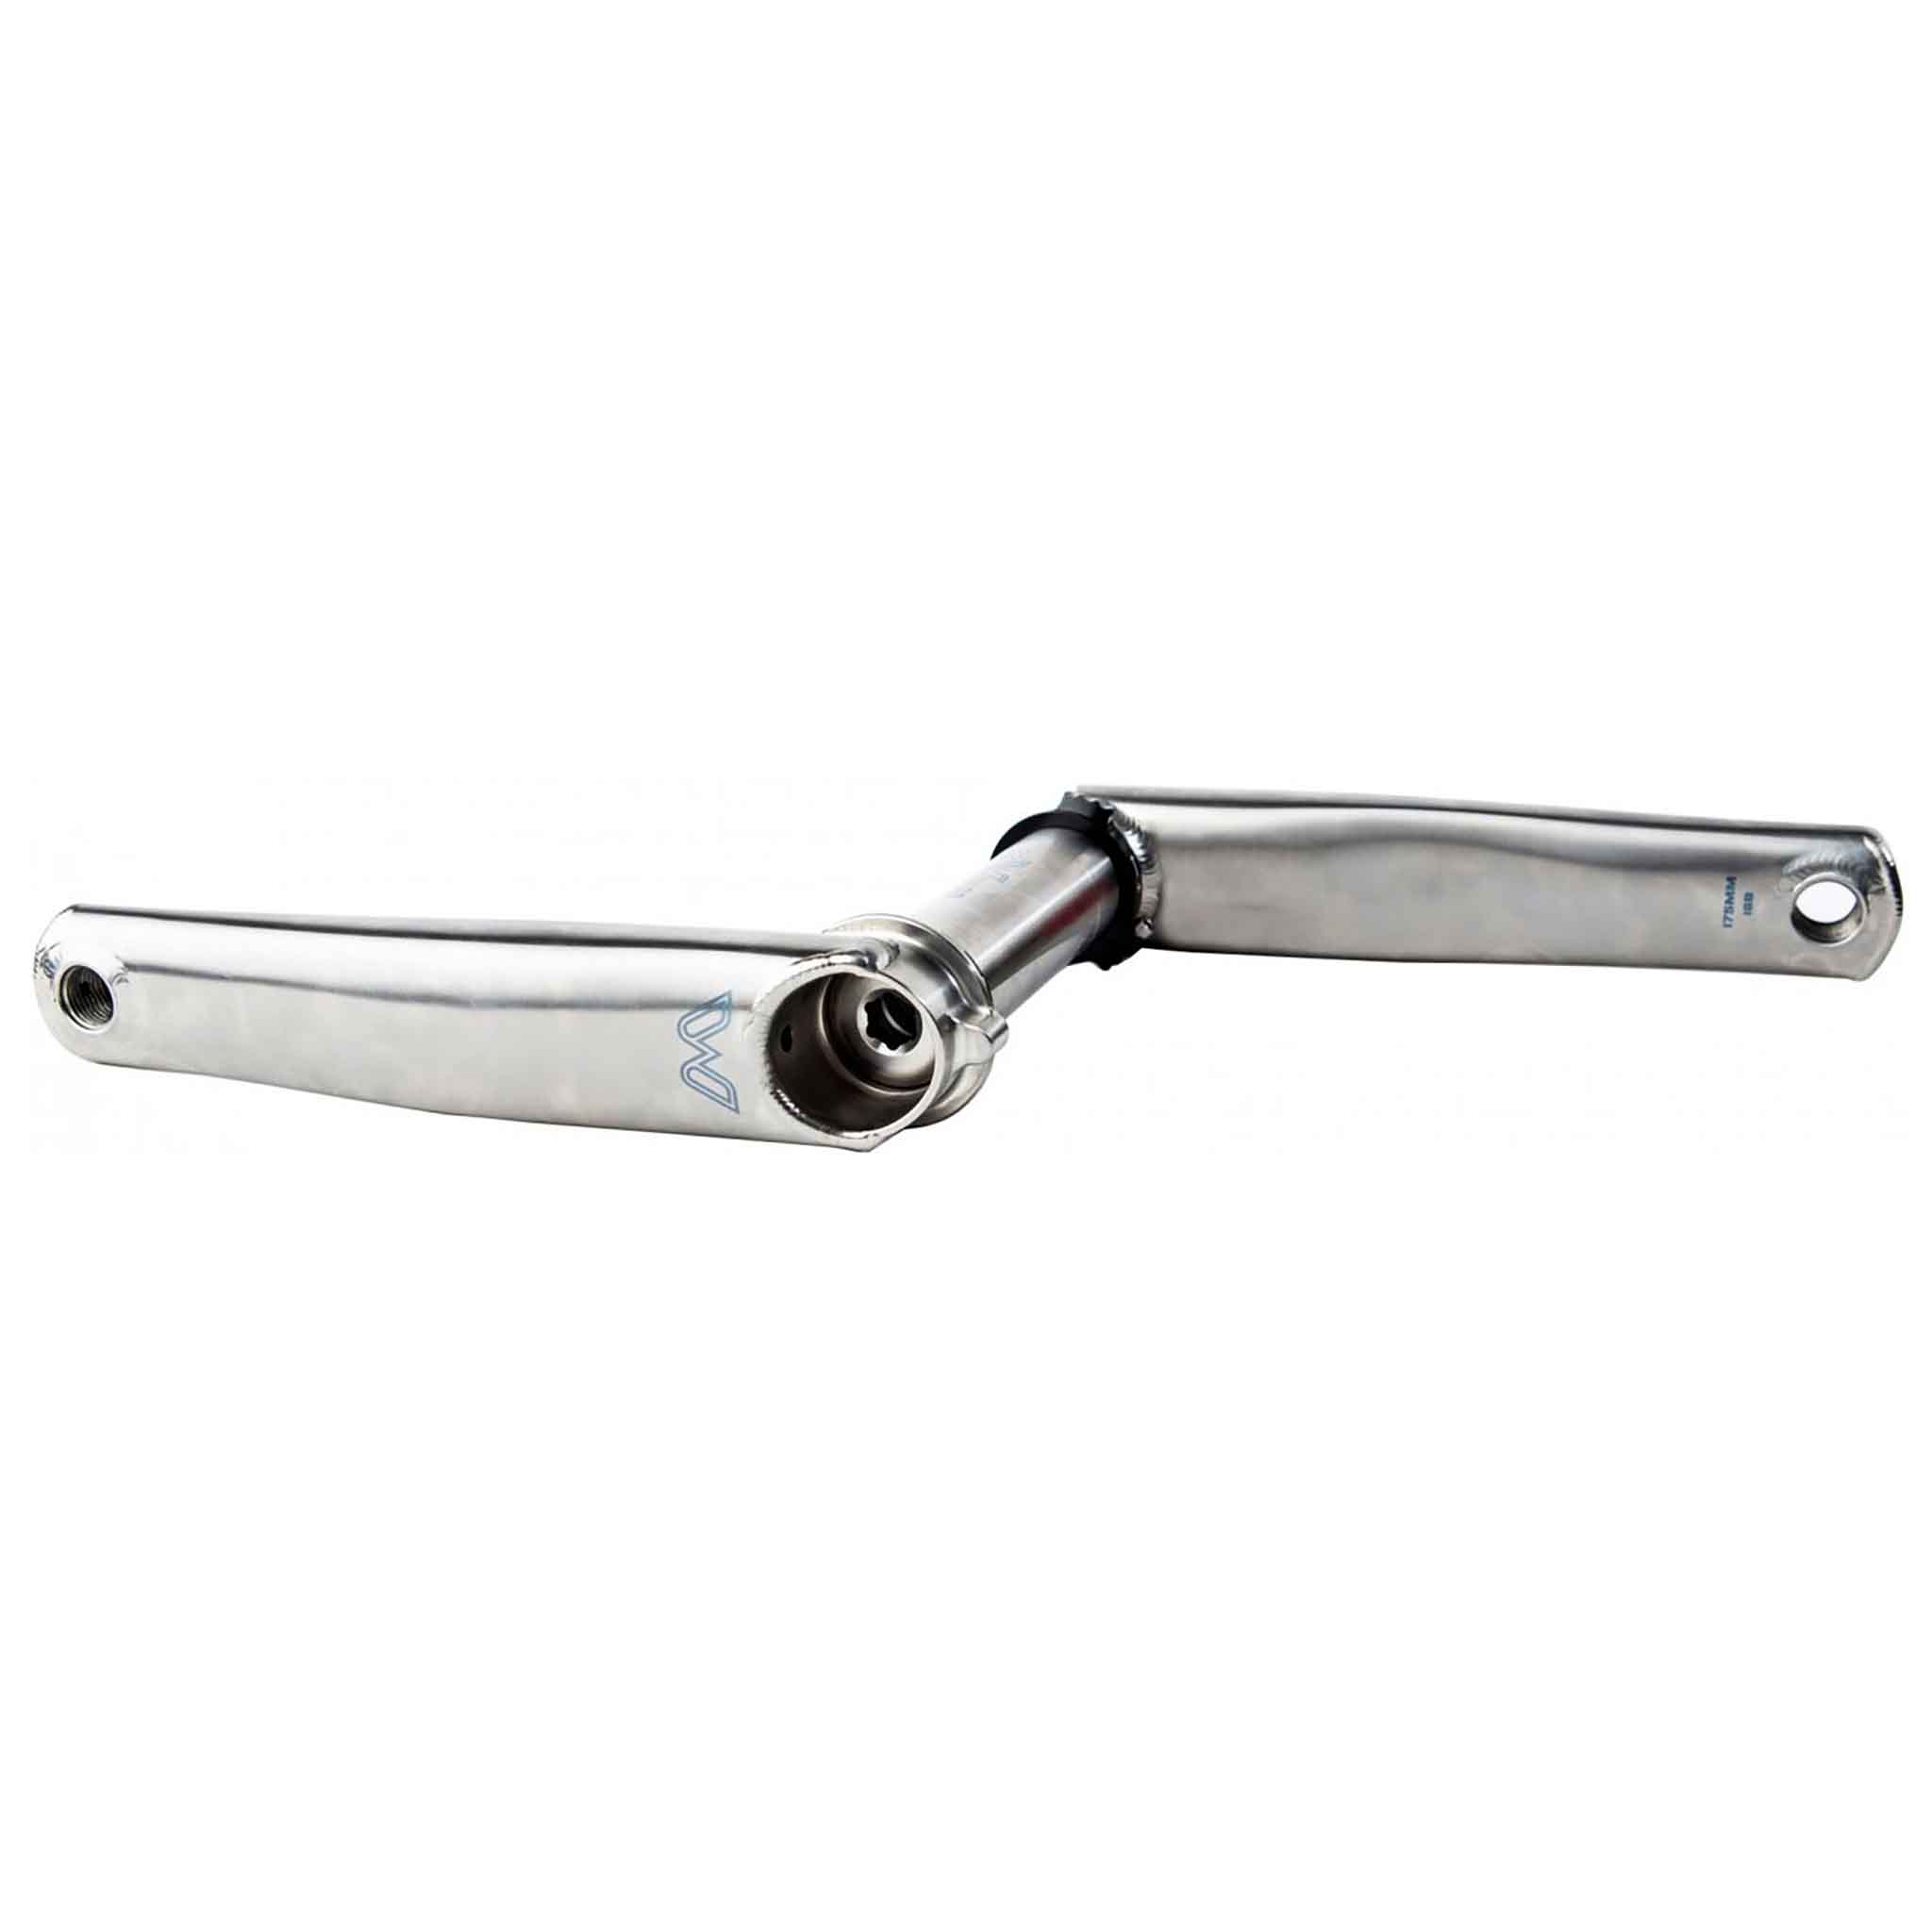 Cane Creek eeWings Ti Cranks 175mm, 3-Bolt, 30mm Spindle